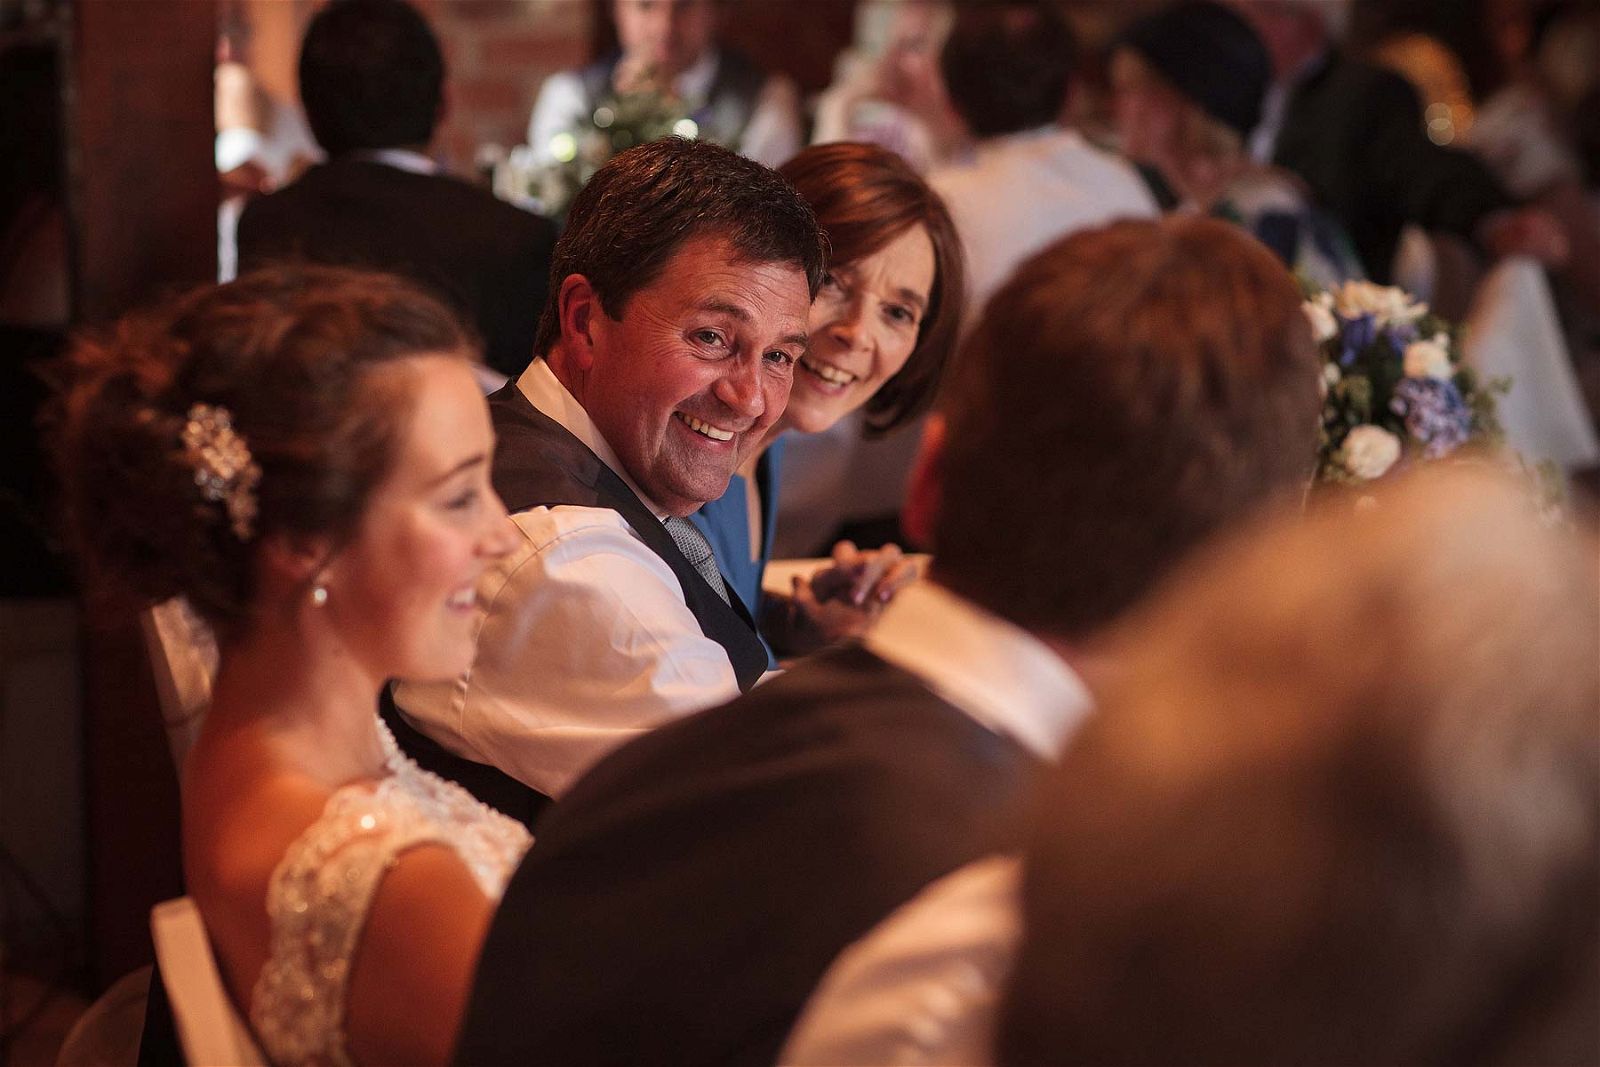 Candid photos that show the fun, emotion and excitement of the wedding breakfast and the fabulous speeches in the barn at Hundred House Hotel in Norton by Shropshire Reportage Wedding Photographer Stuart James